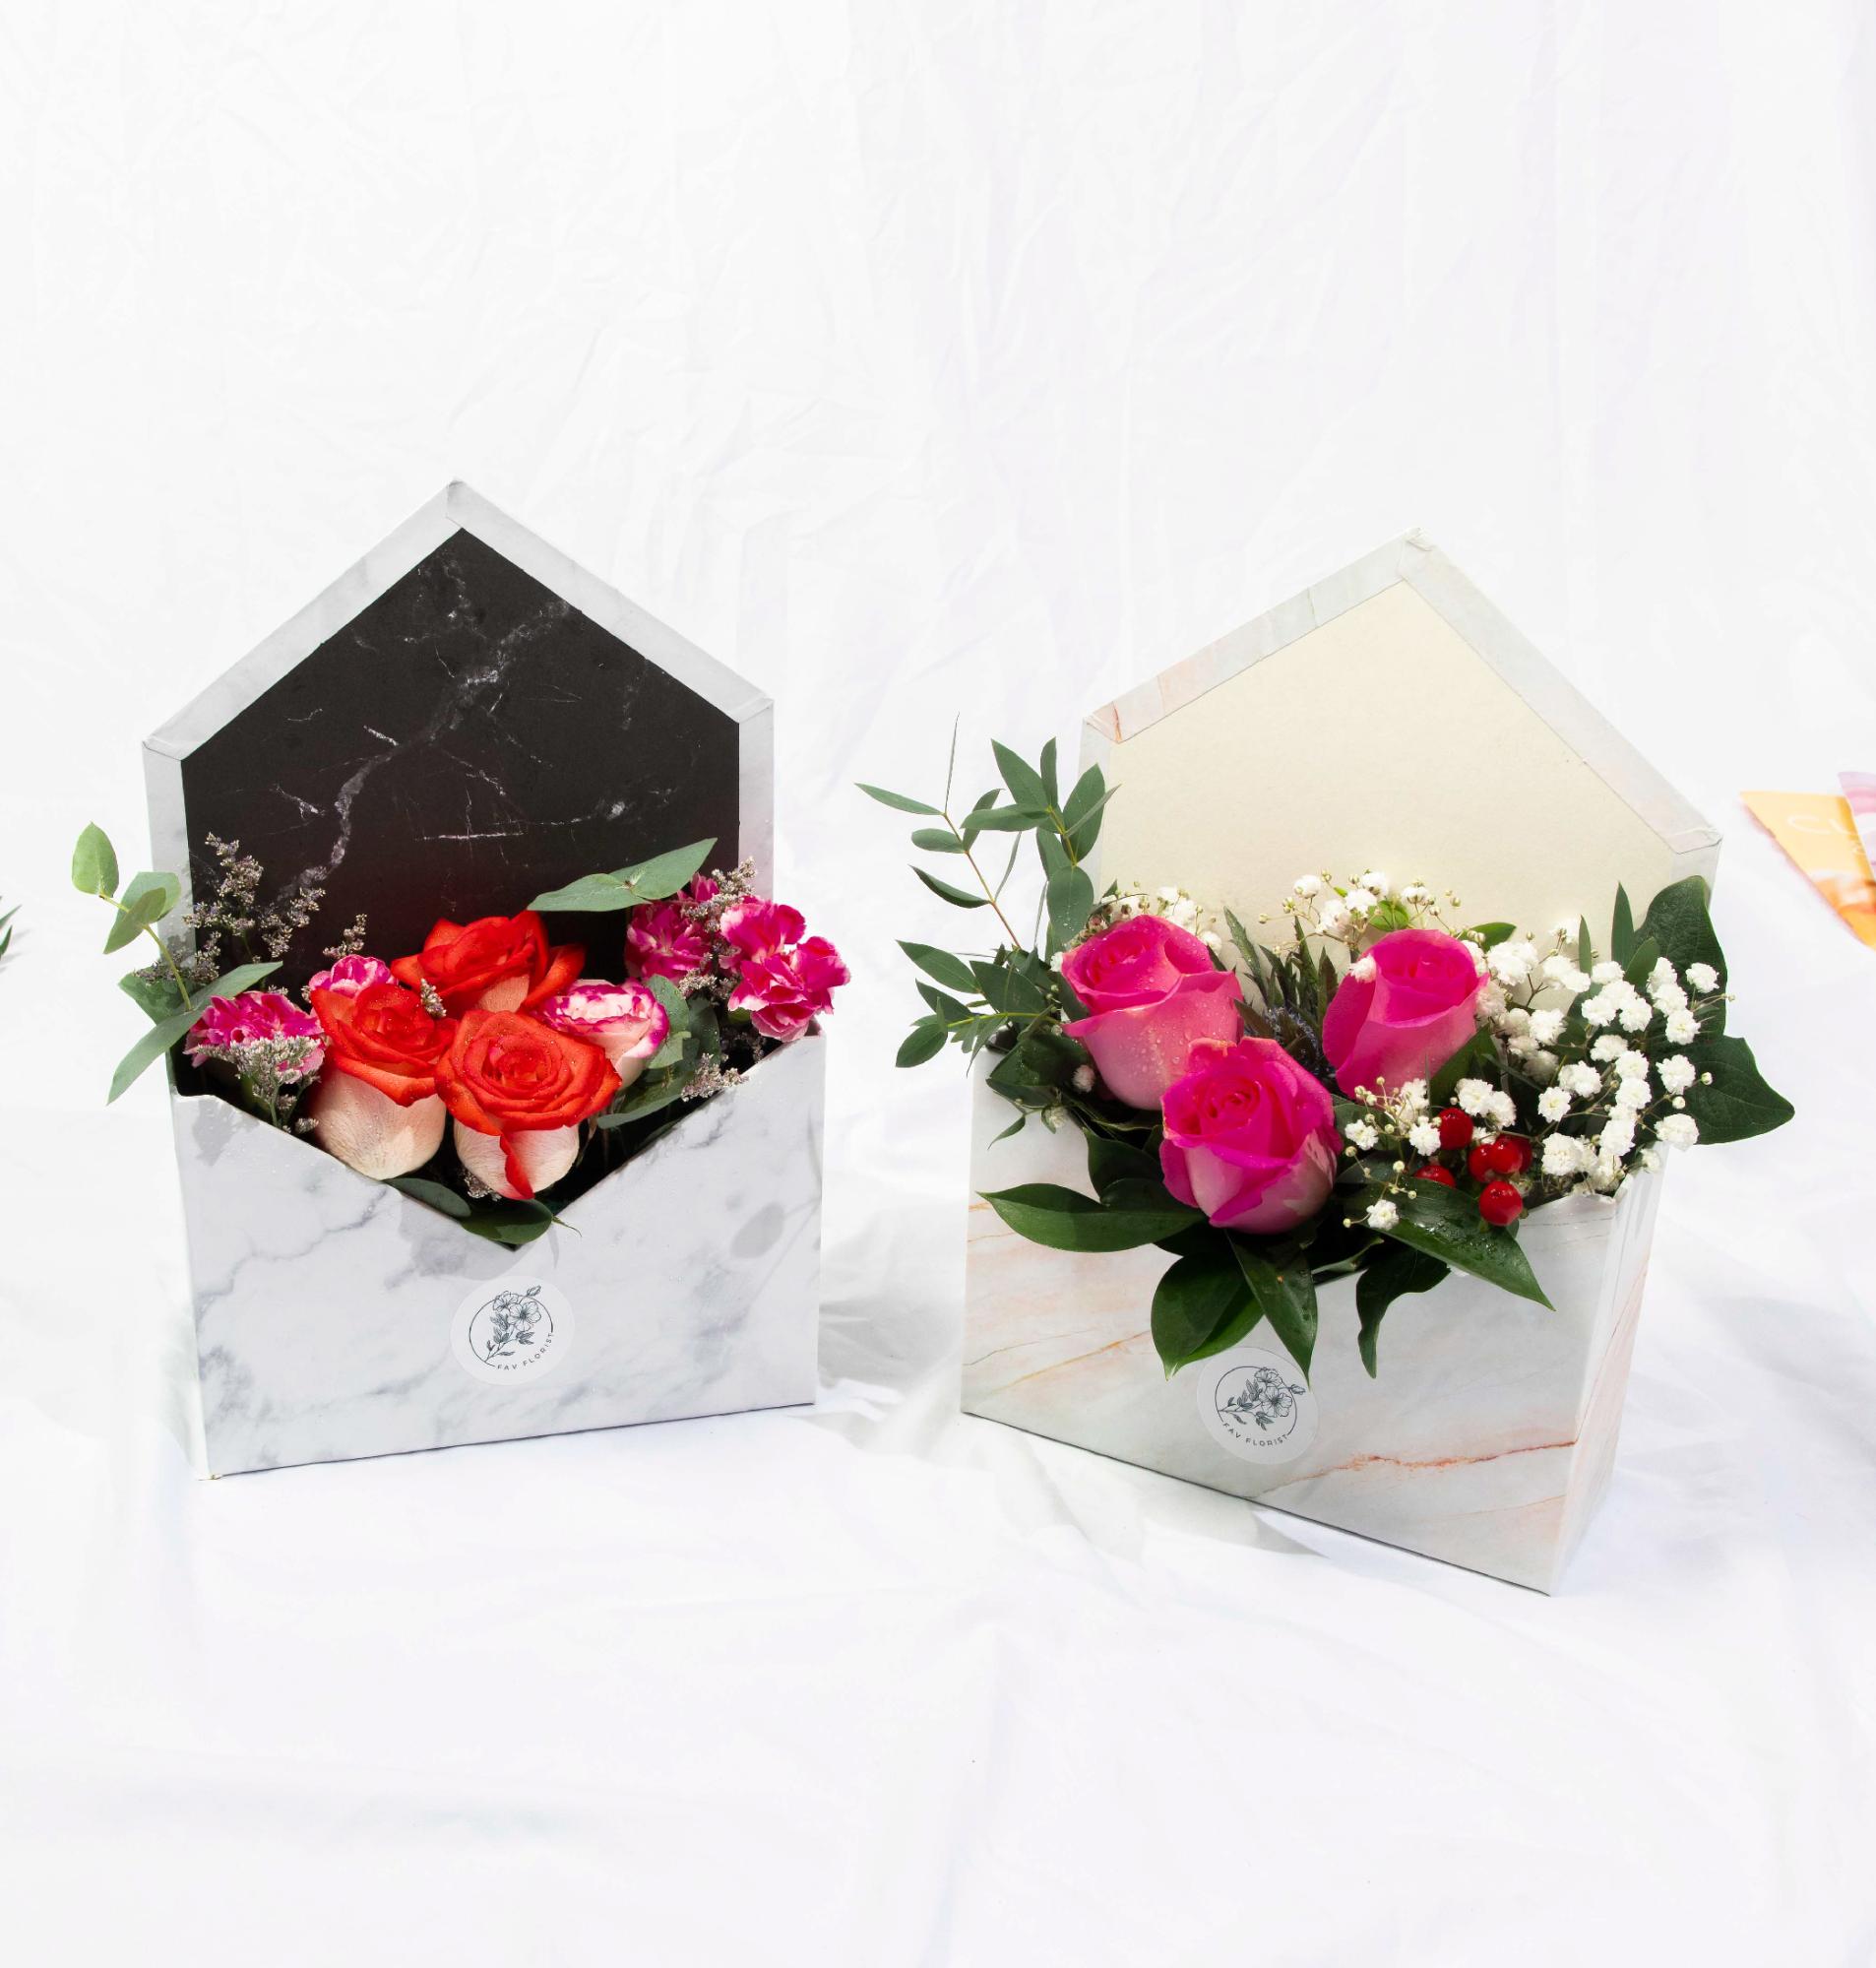 Flower Bouquets & Gifts for Her / Girlfriend Singapore